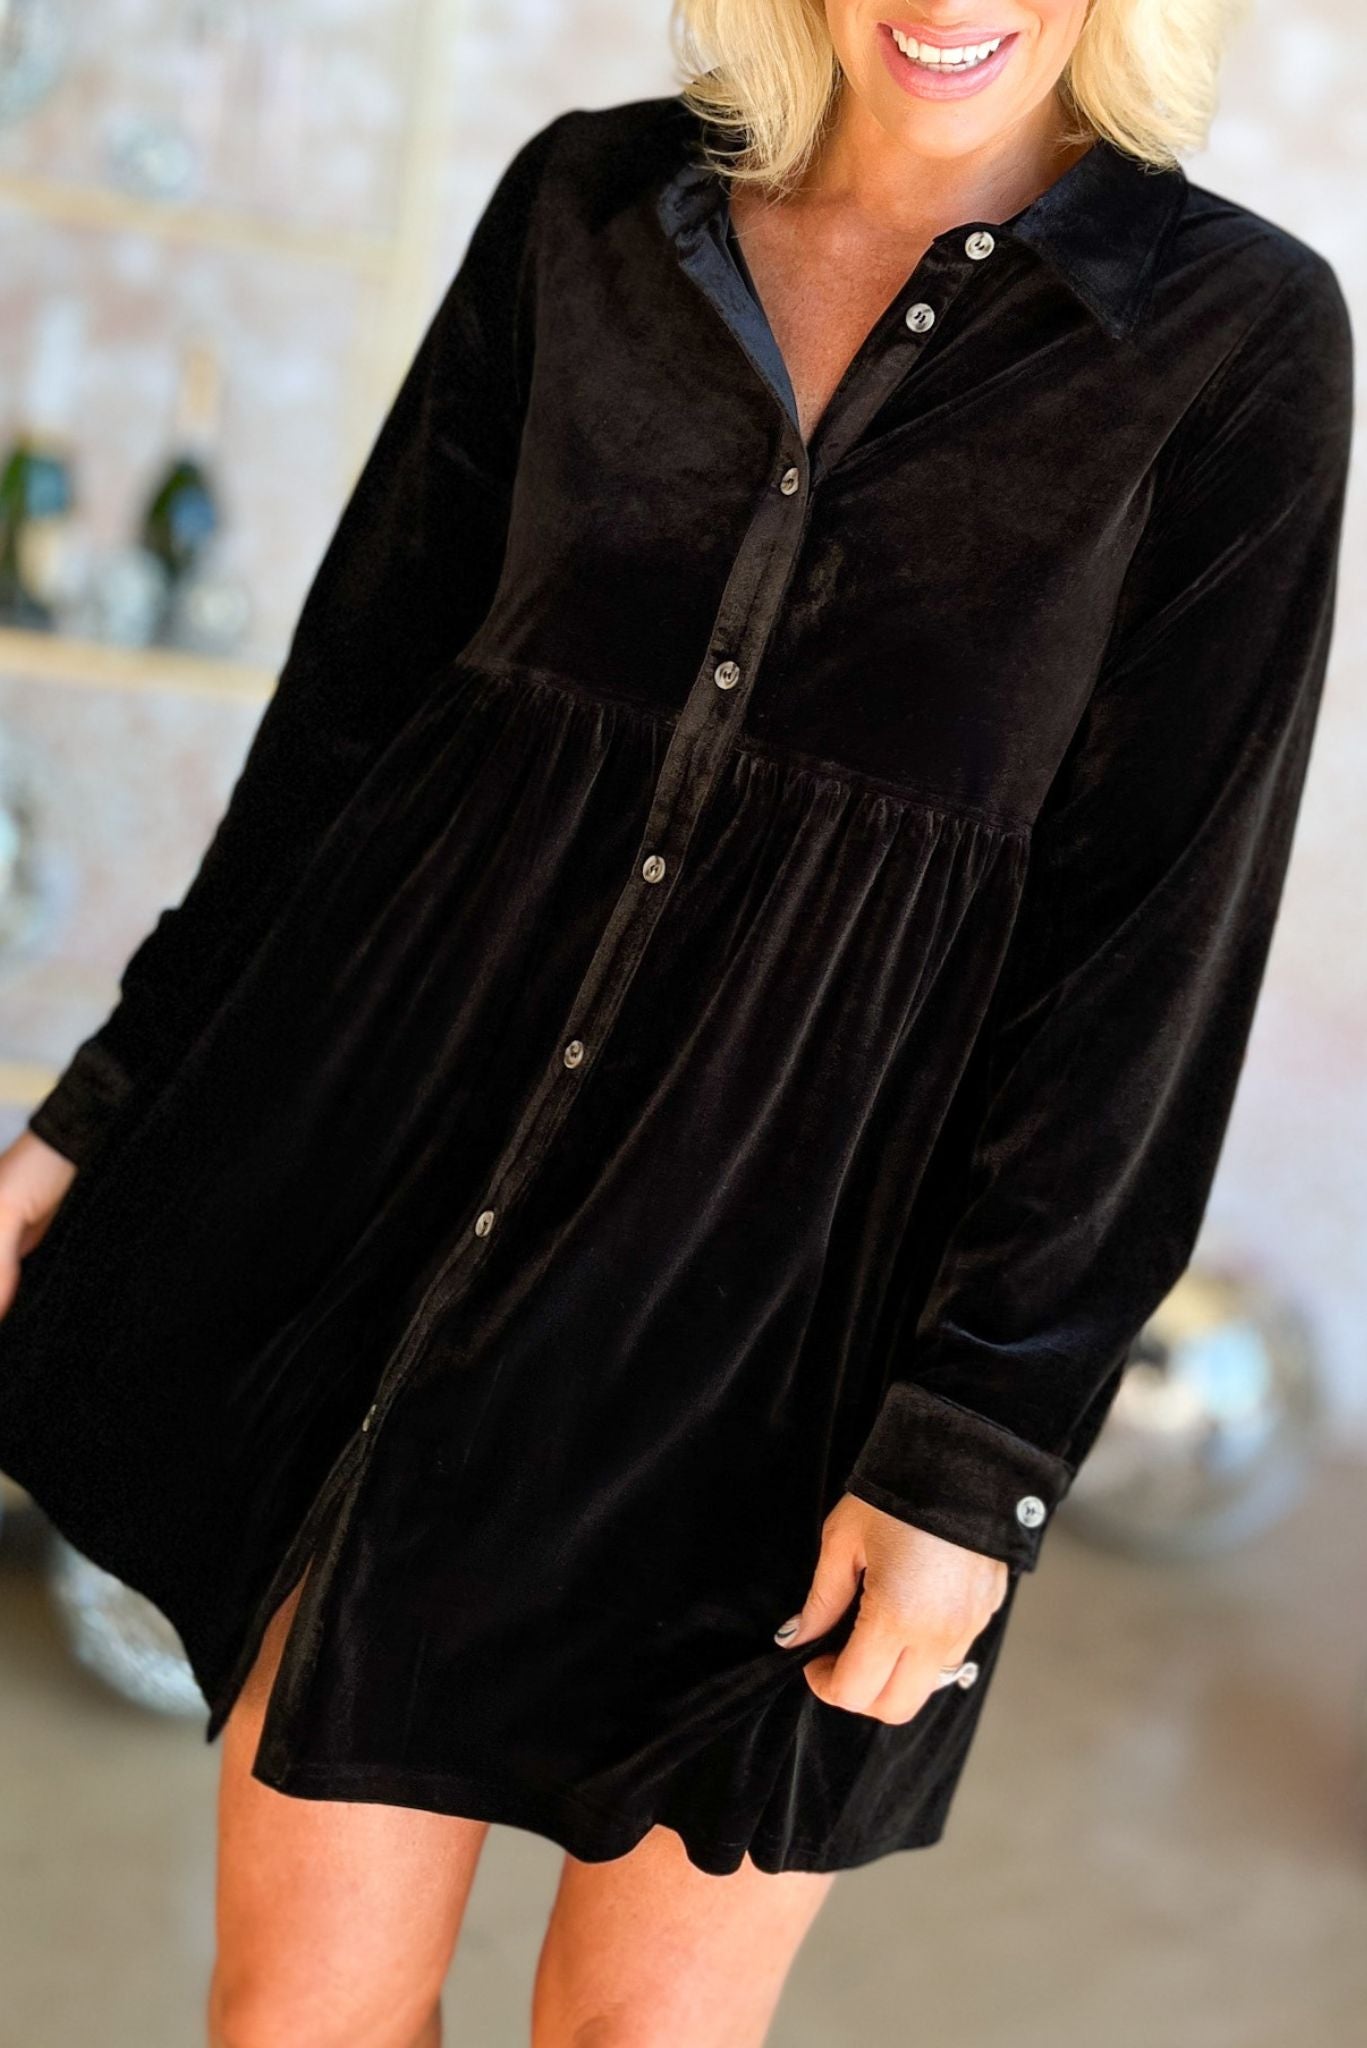  Black Velvet Button Up Long Sleeve Babydoll Dress, fall fashion, pre party, holiday look, party look, date night, mom style, must have, shop style your senses by mallory fitzsimmons